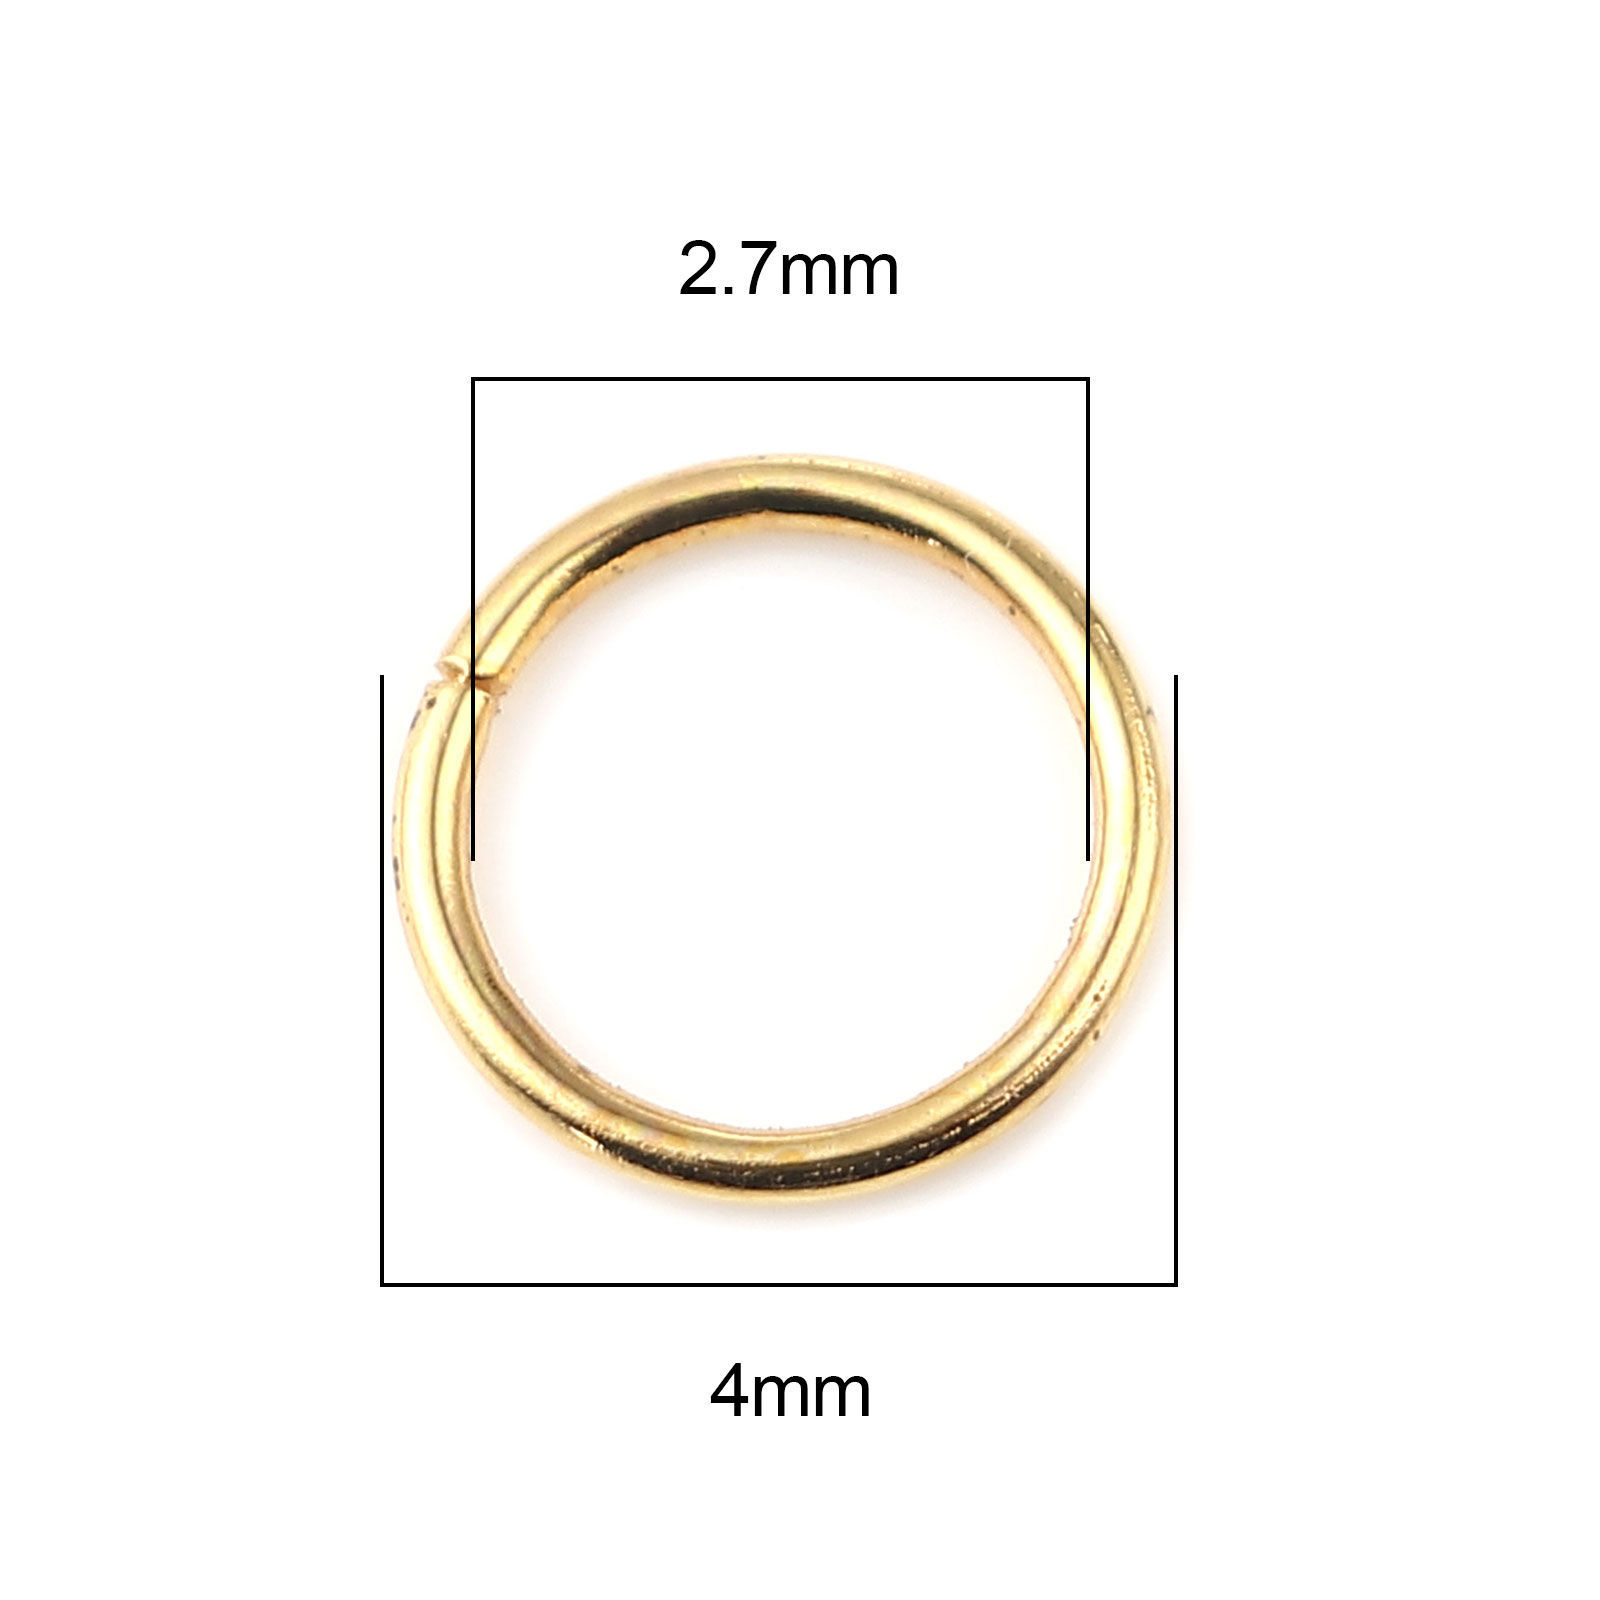 Picture of 0.7mm Iron Based Alloy Open Jump Rings Findings Circle Ring Gold Plated 4mm Dia, 200 PCs